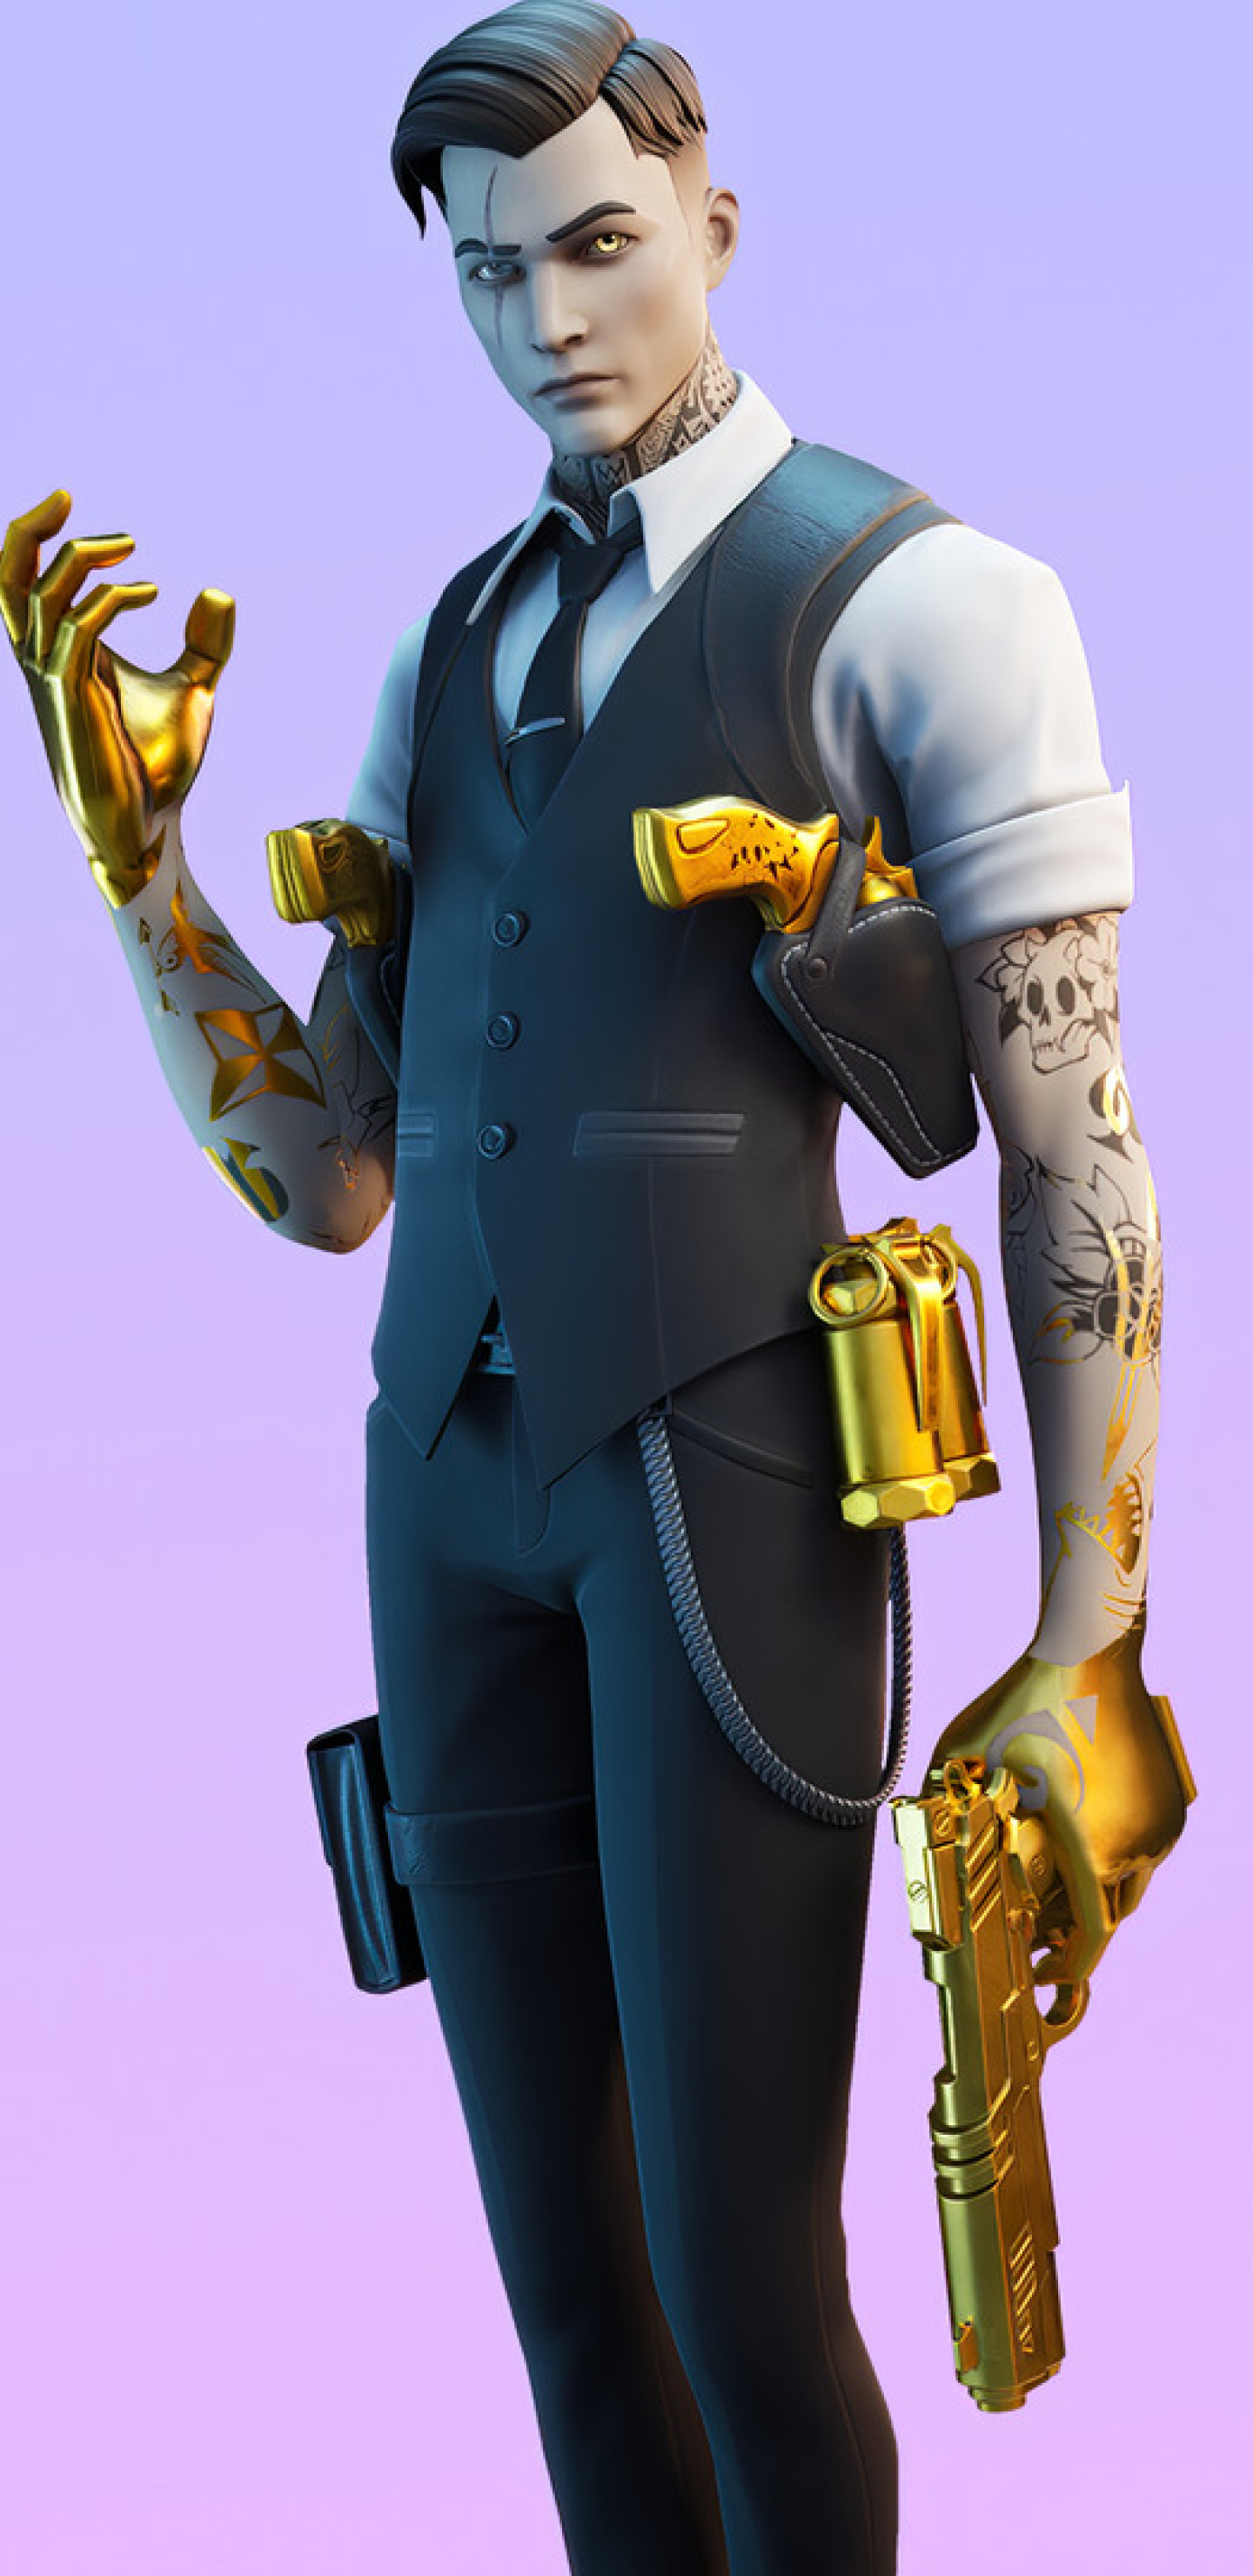 1440x2960-fortnite-midas-skin-4k-outfit-samsung-galaxy-note-9-8-s9-s8